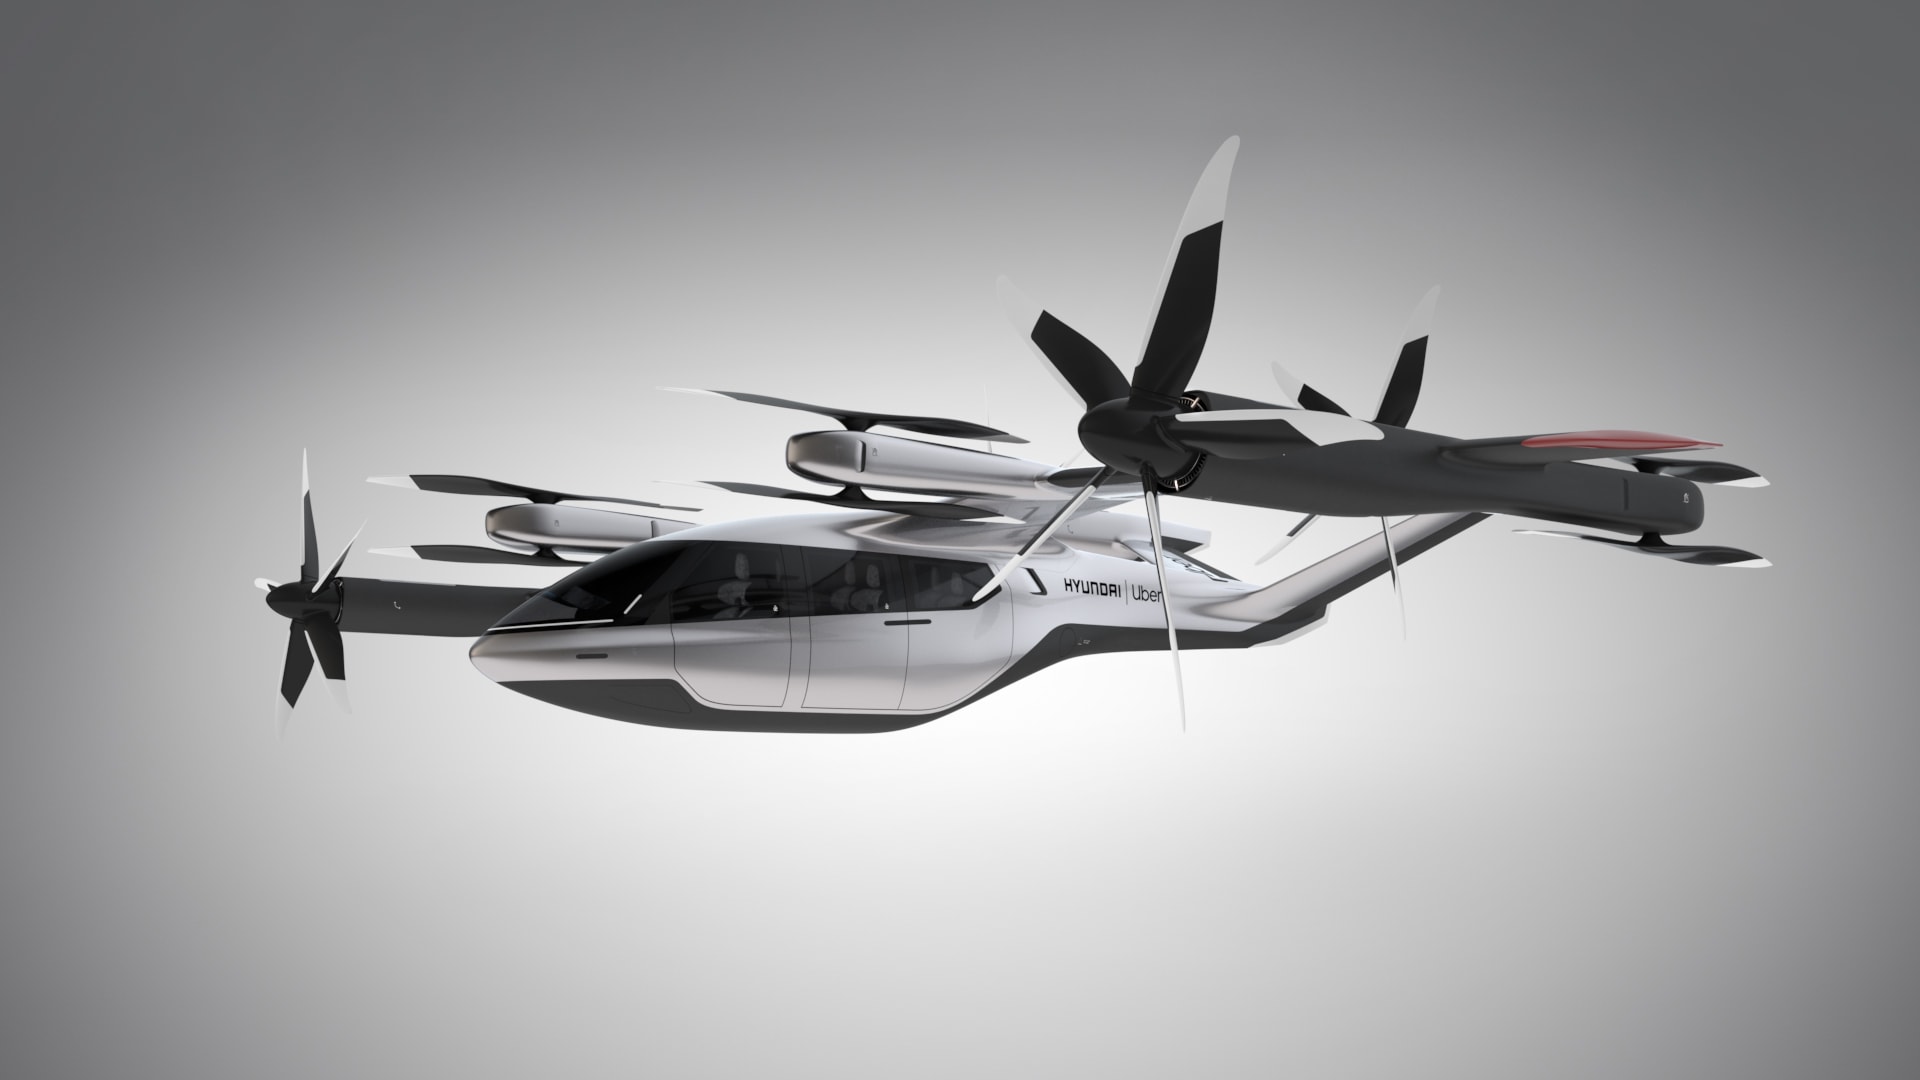 the prototype uber air taxi vehicle